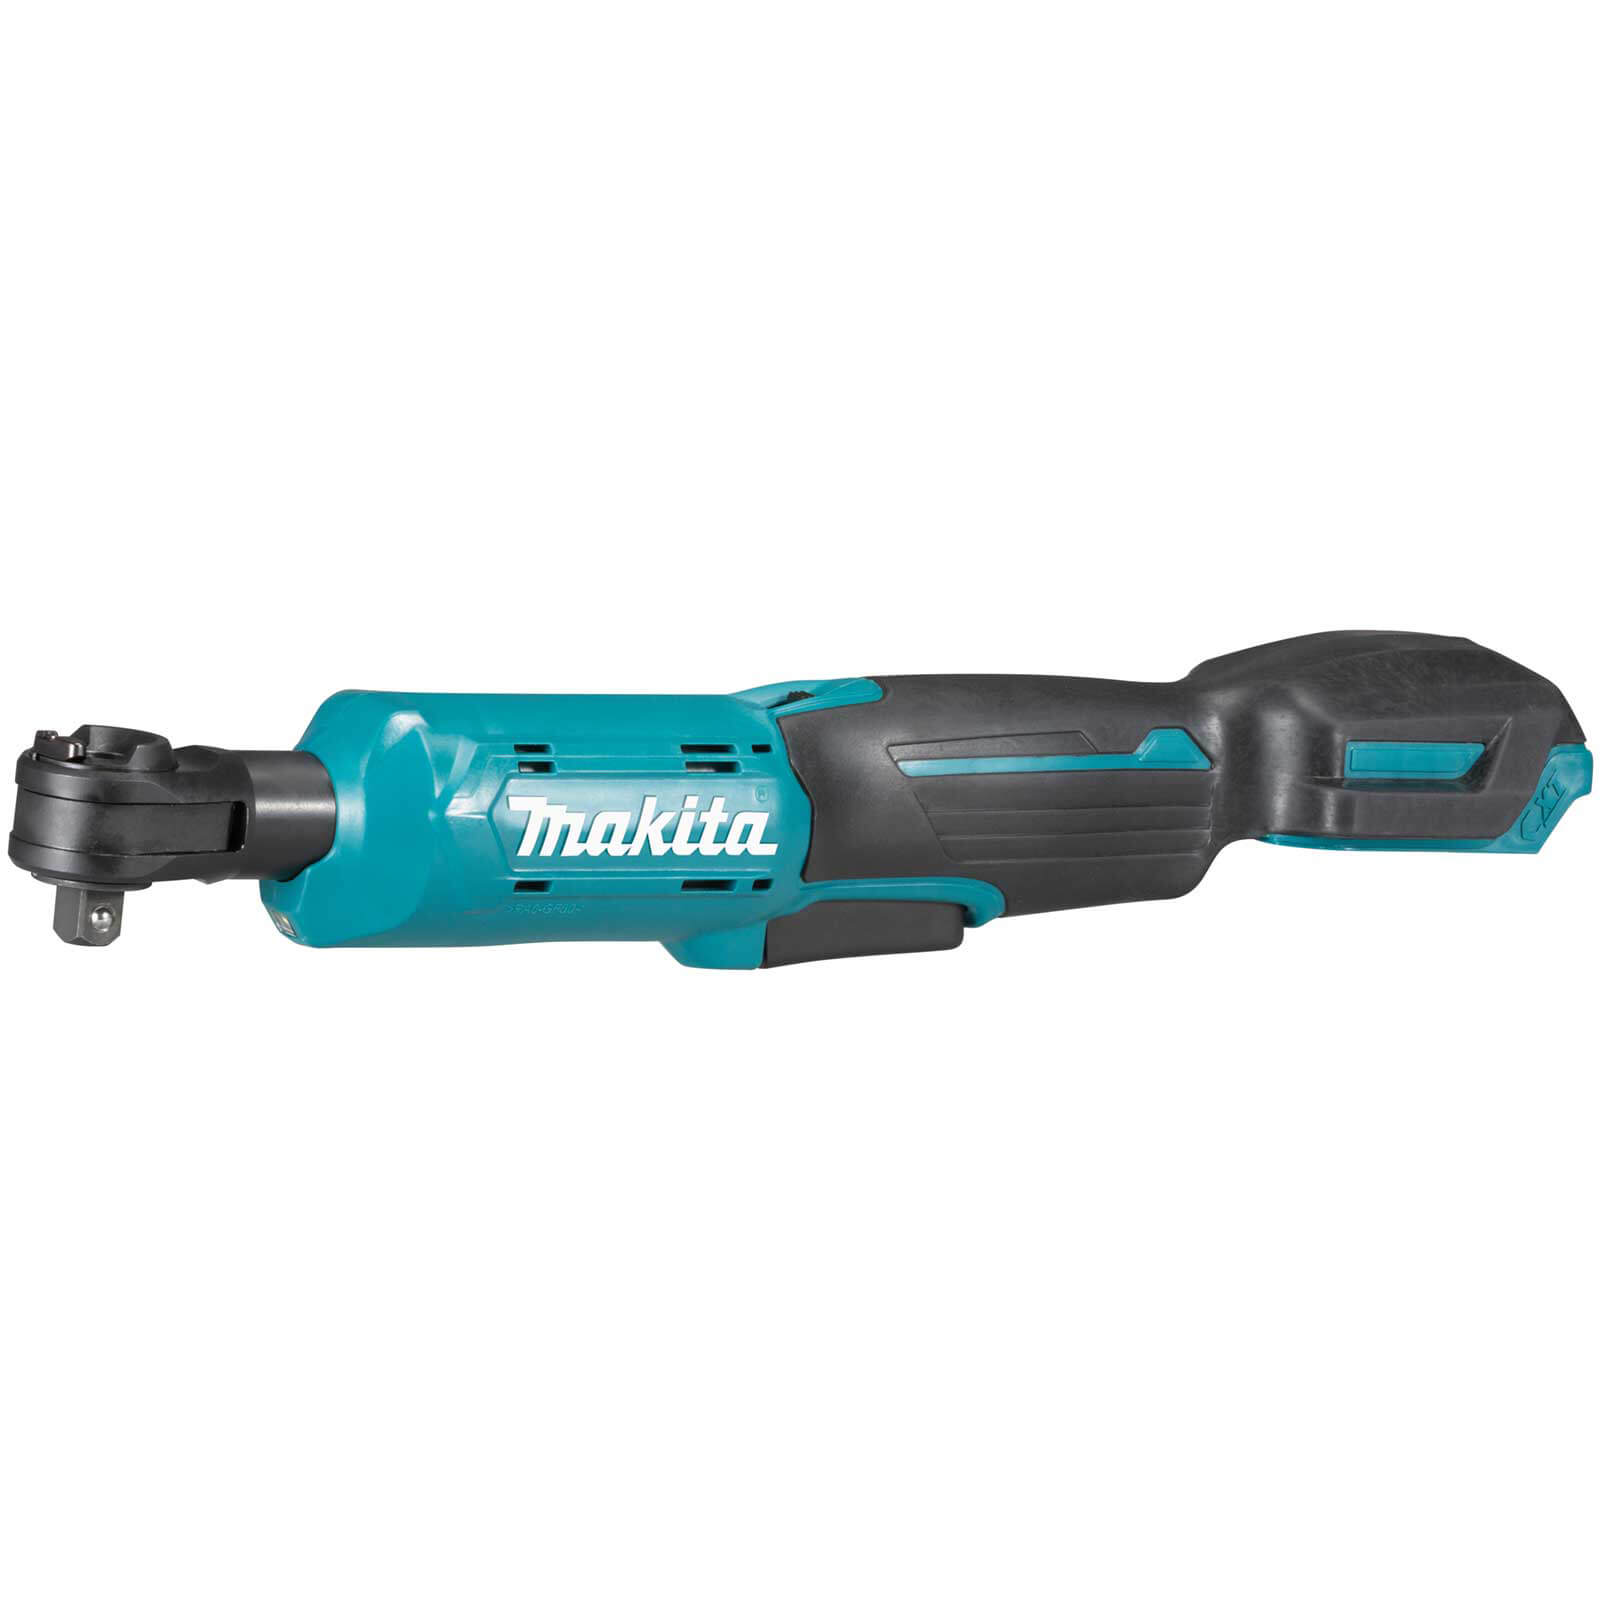 Photo of Makita Wr100dz 12v Max Cxt Ratchet Wrench No Batteries No Charger No Case